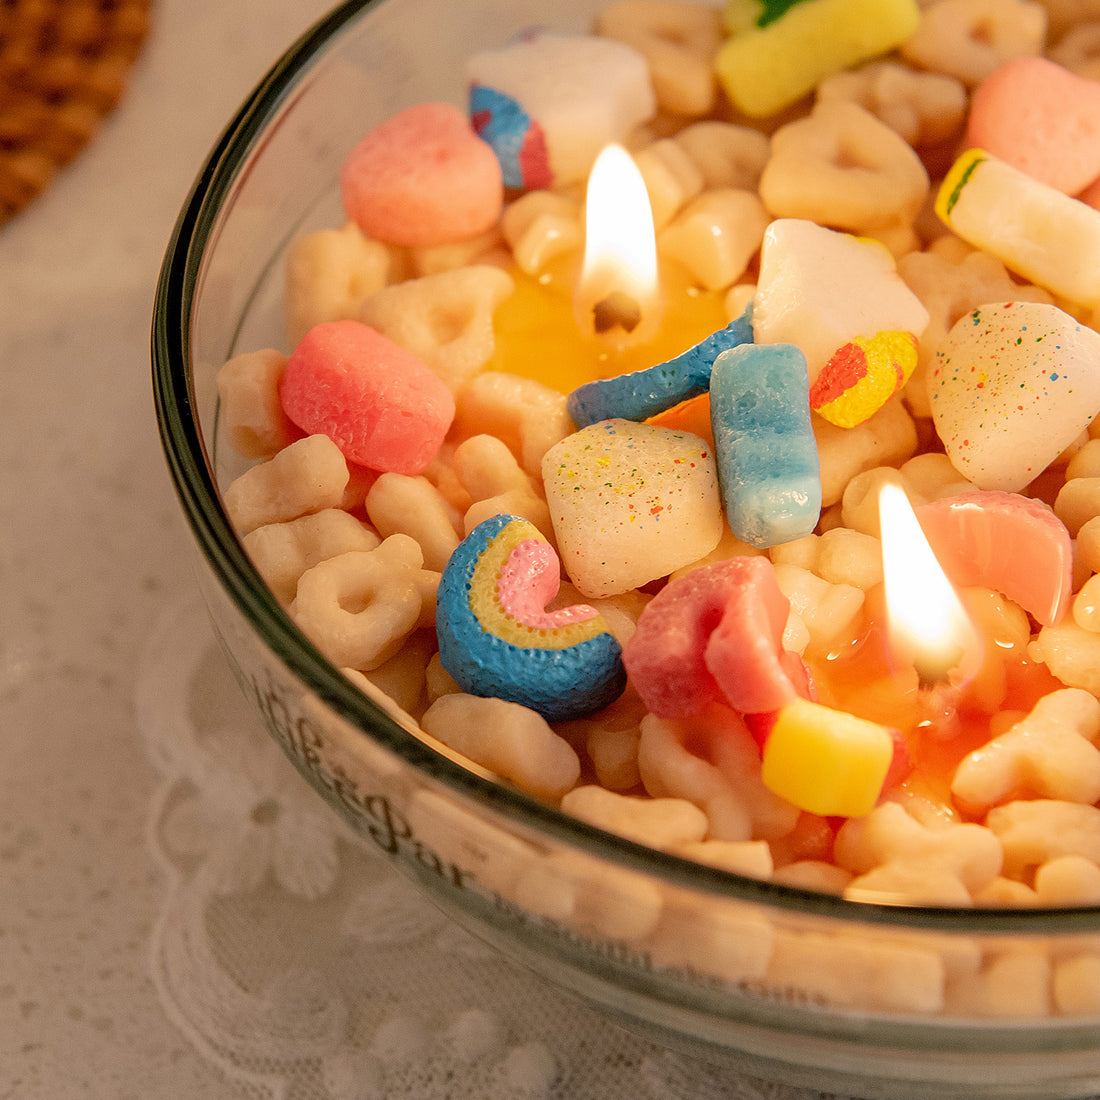 Fruit Loops Cereal Candle Bowl – Southlake gifts